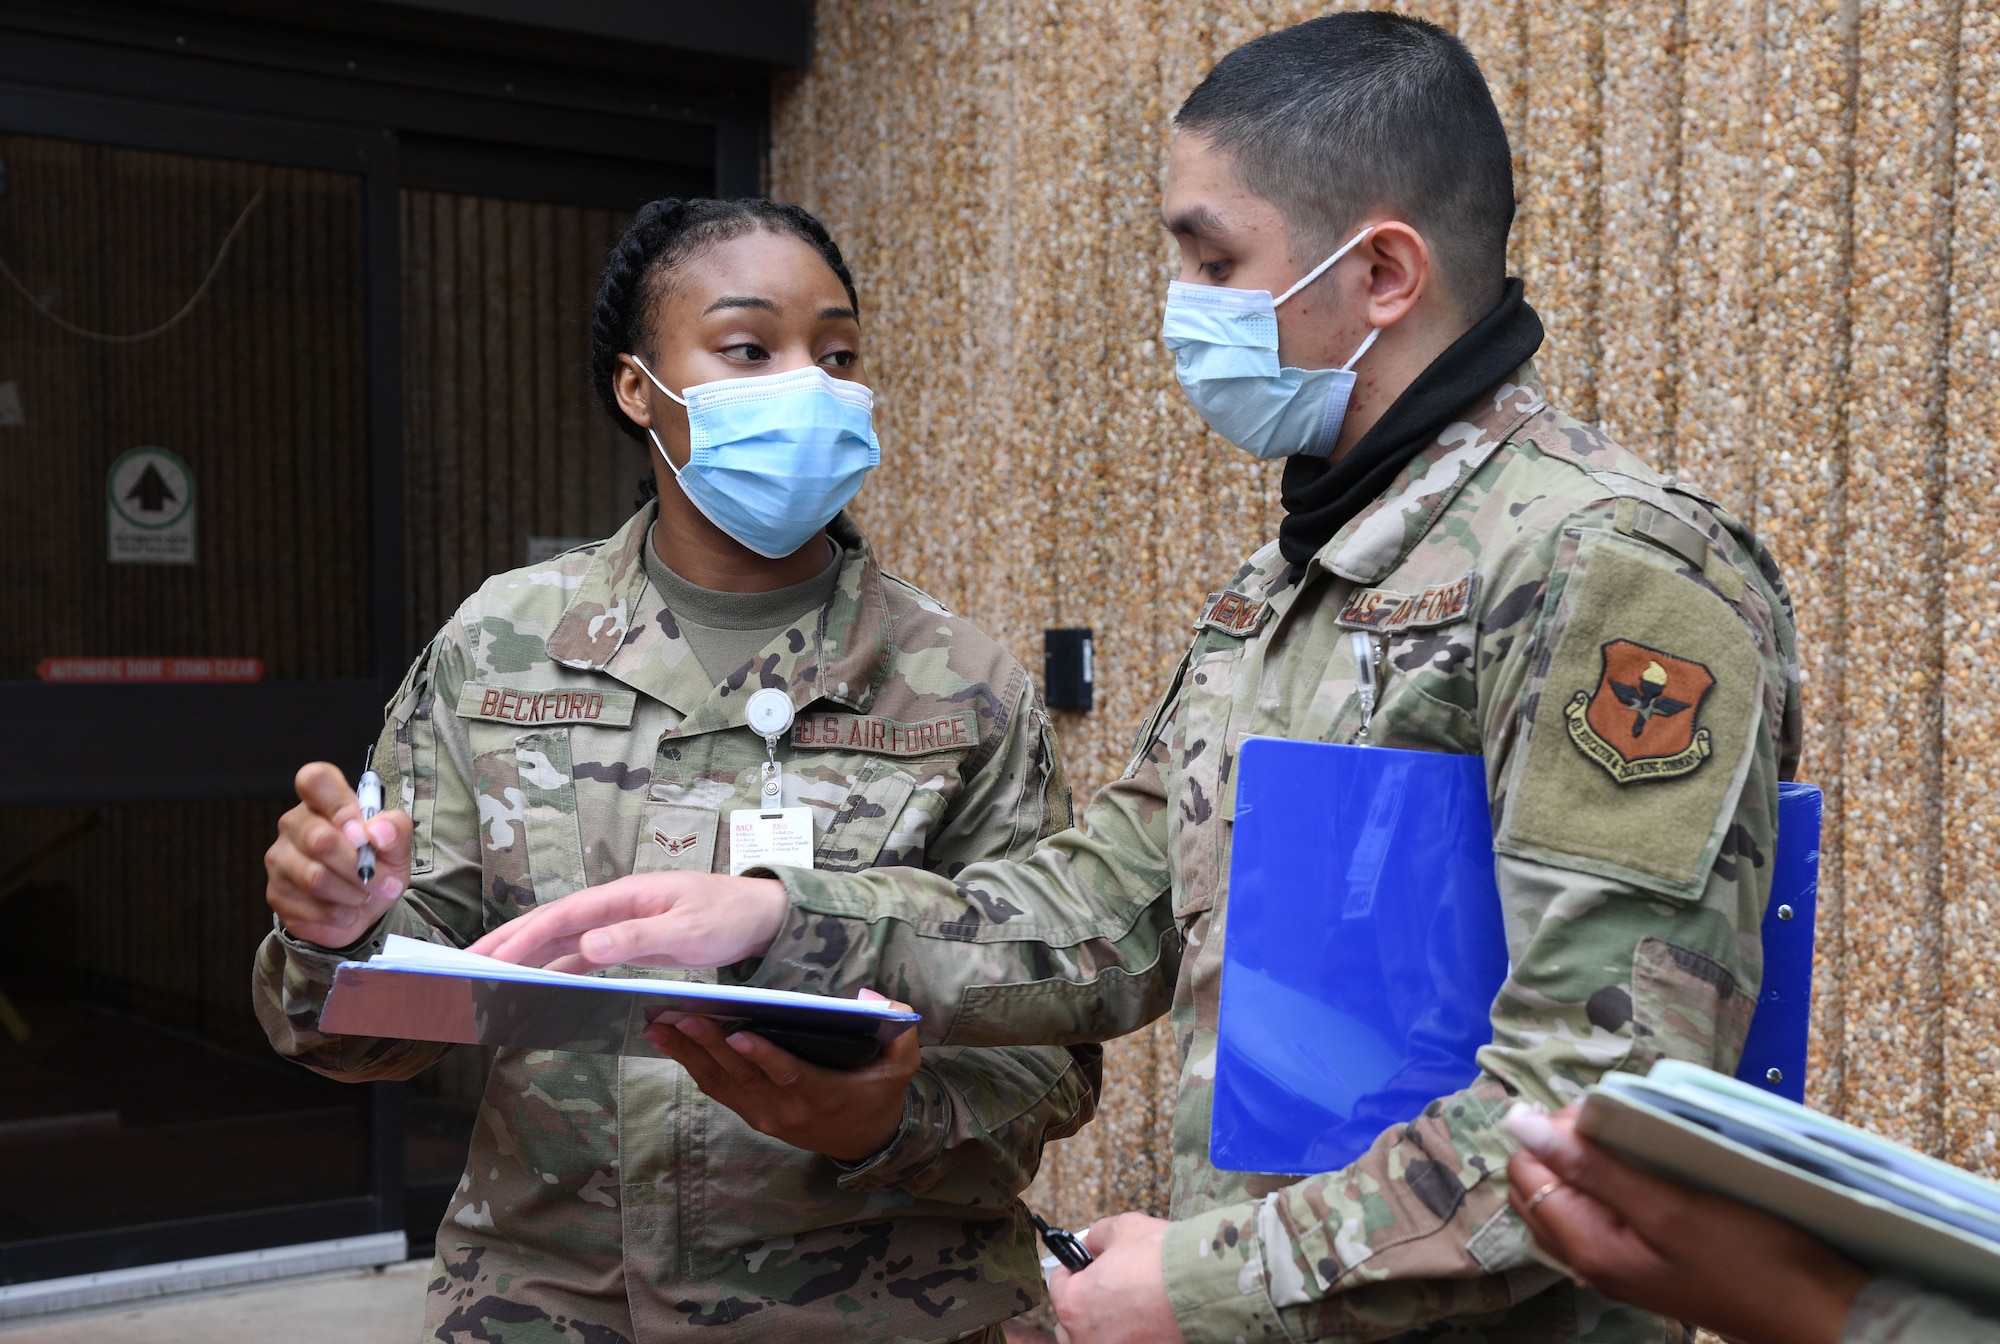 U.S. Air Force Airman 1st Class Brianna Beckford, 81st Medical Support Squadron outpatient records administrator, and Senior Airman Chrysdarius Meneses, 81st Diagnostic and Therapeutics Squadron radiology administrator, verify patient information during an 81st Medical Group functional exercise behind the Keesler Medical Center at Keesler Air Force Base, Mississippi, July 15, 2021. The scenario involved a chlorine cylinder explosion causing chemical burns and other injuries on several victims. The mass casualty exercise was held to prepare for real-world events by strengthening disaster medical response capabilities. (U.S. Air Force photo by Kemberly Groue)